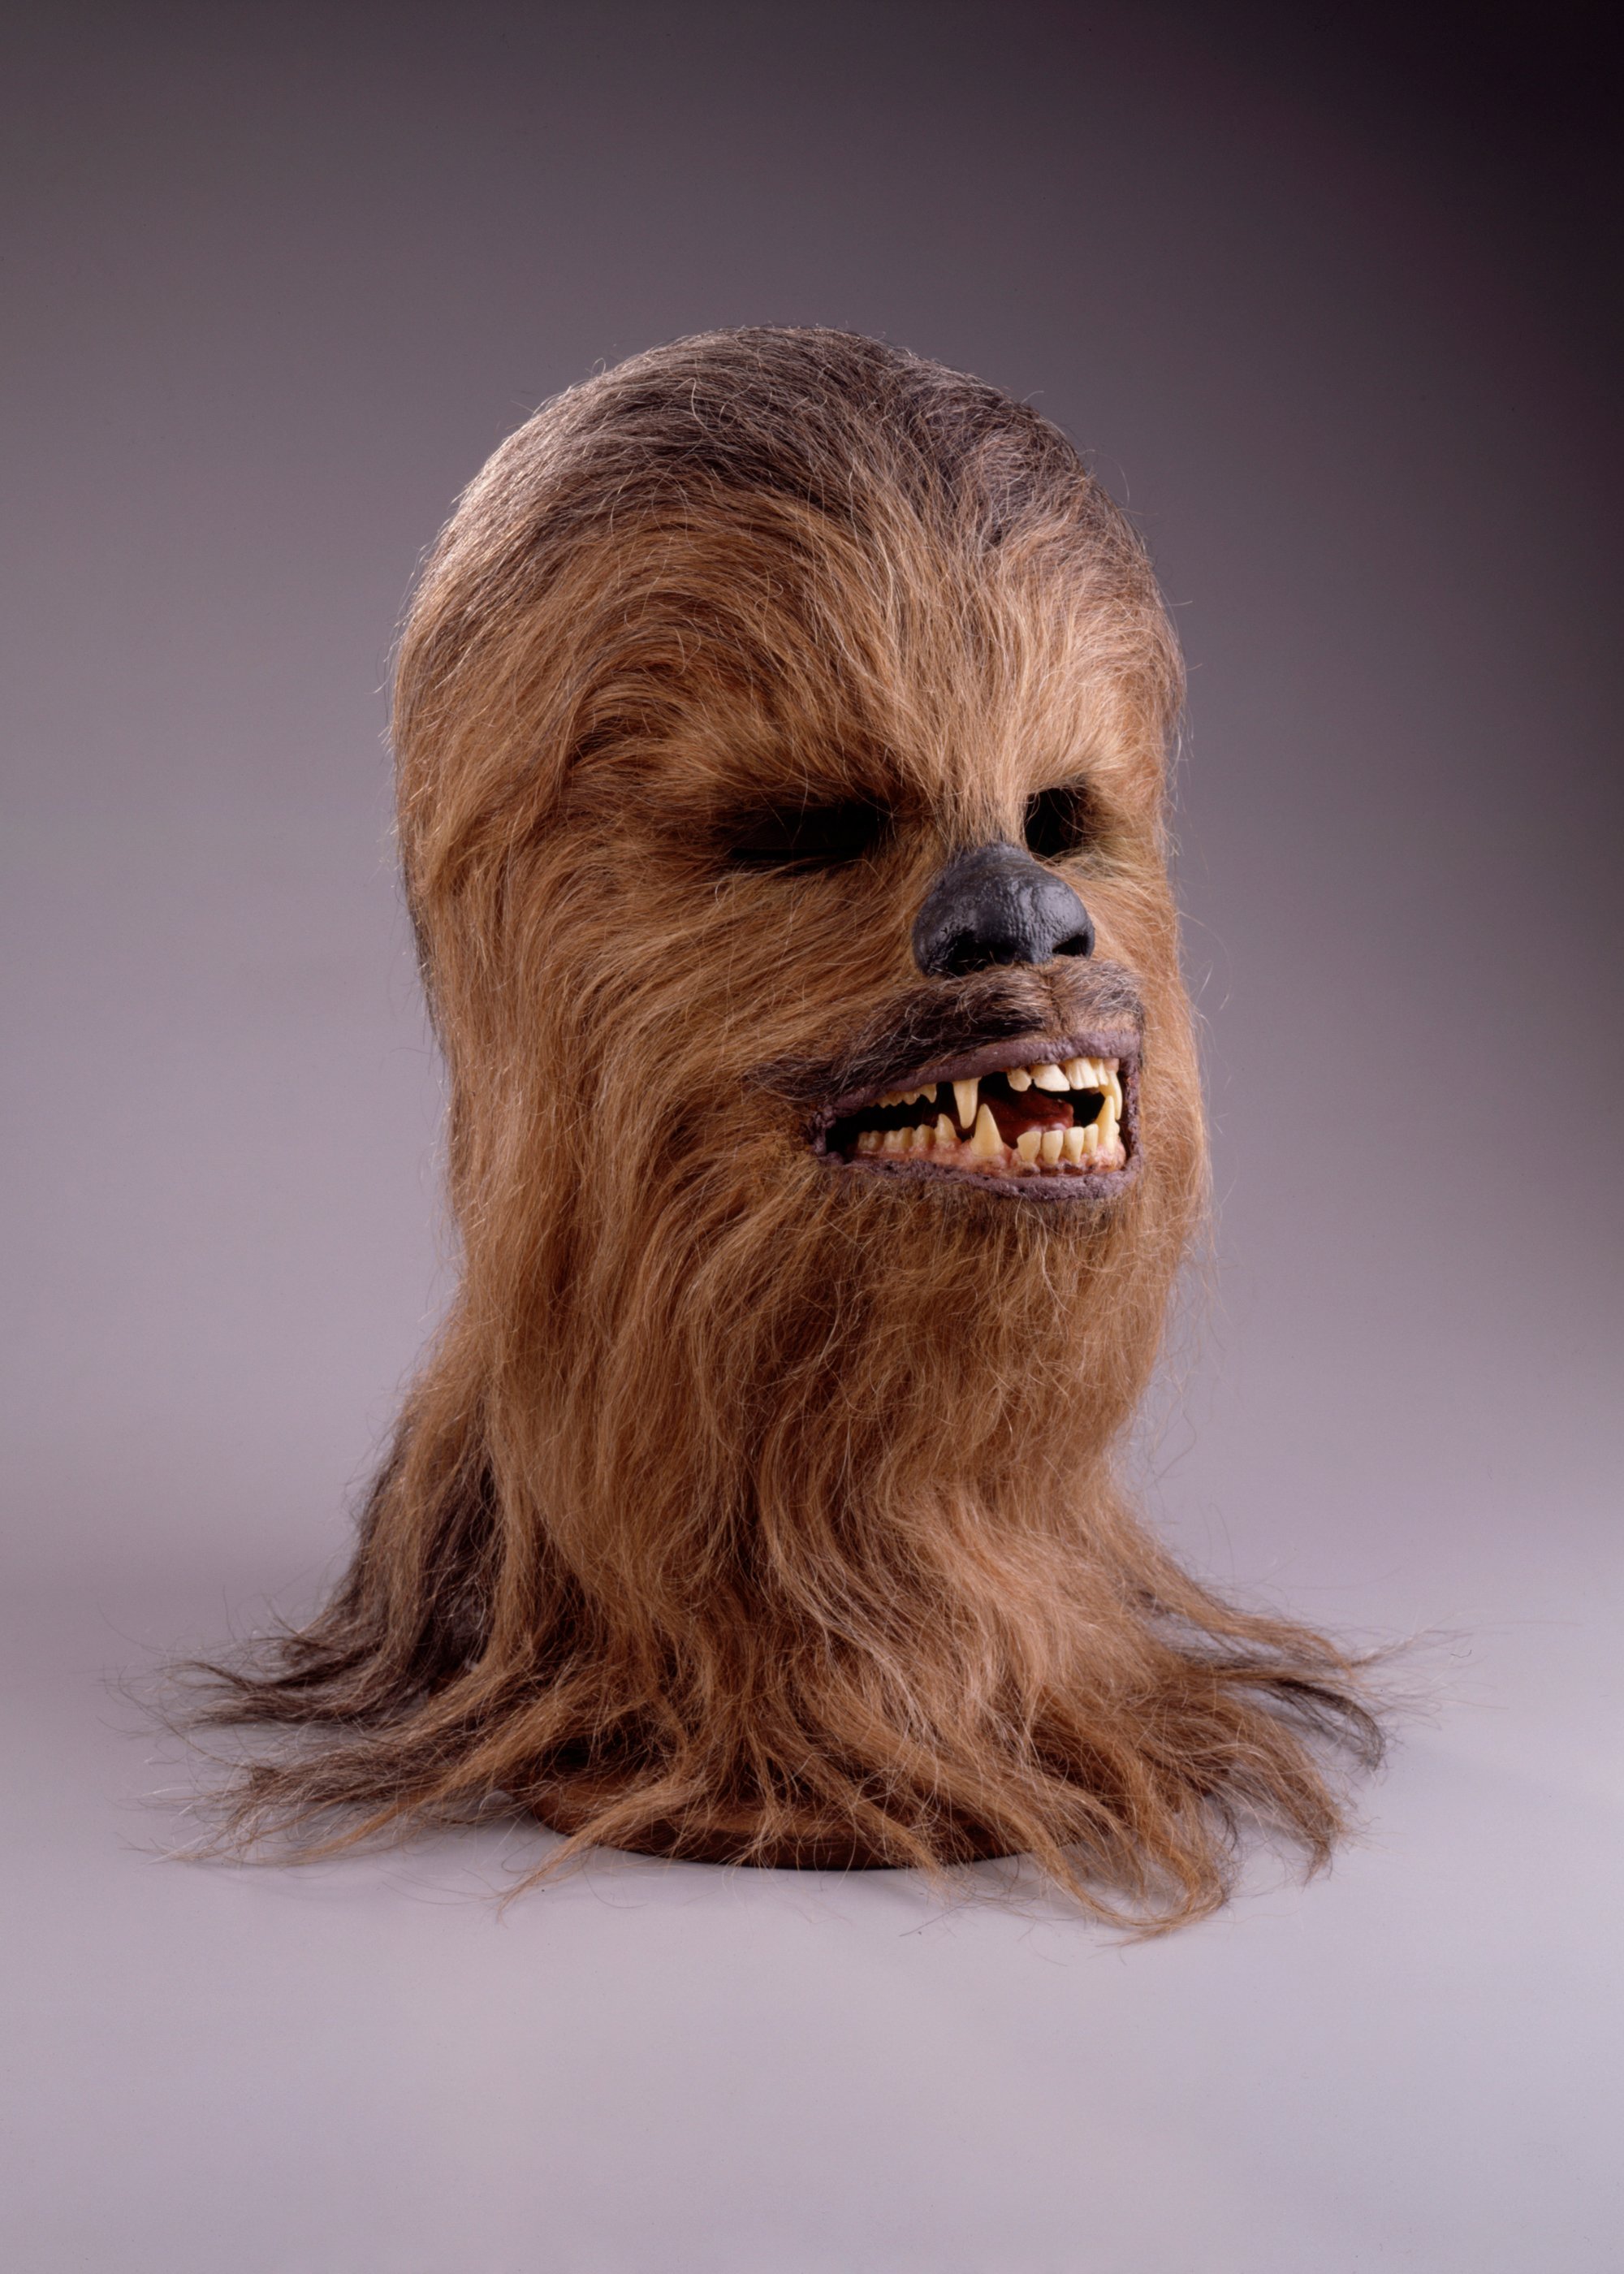 The head of the character Chewbacca, mouth slightly open showing fangs